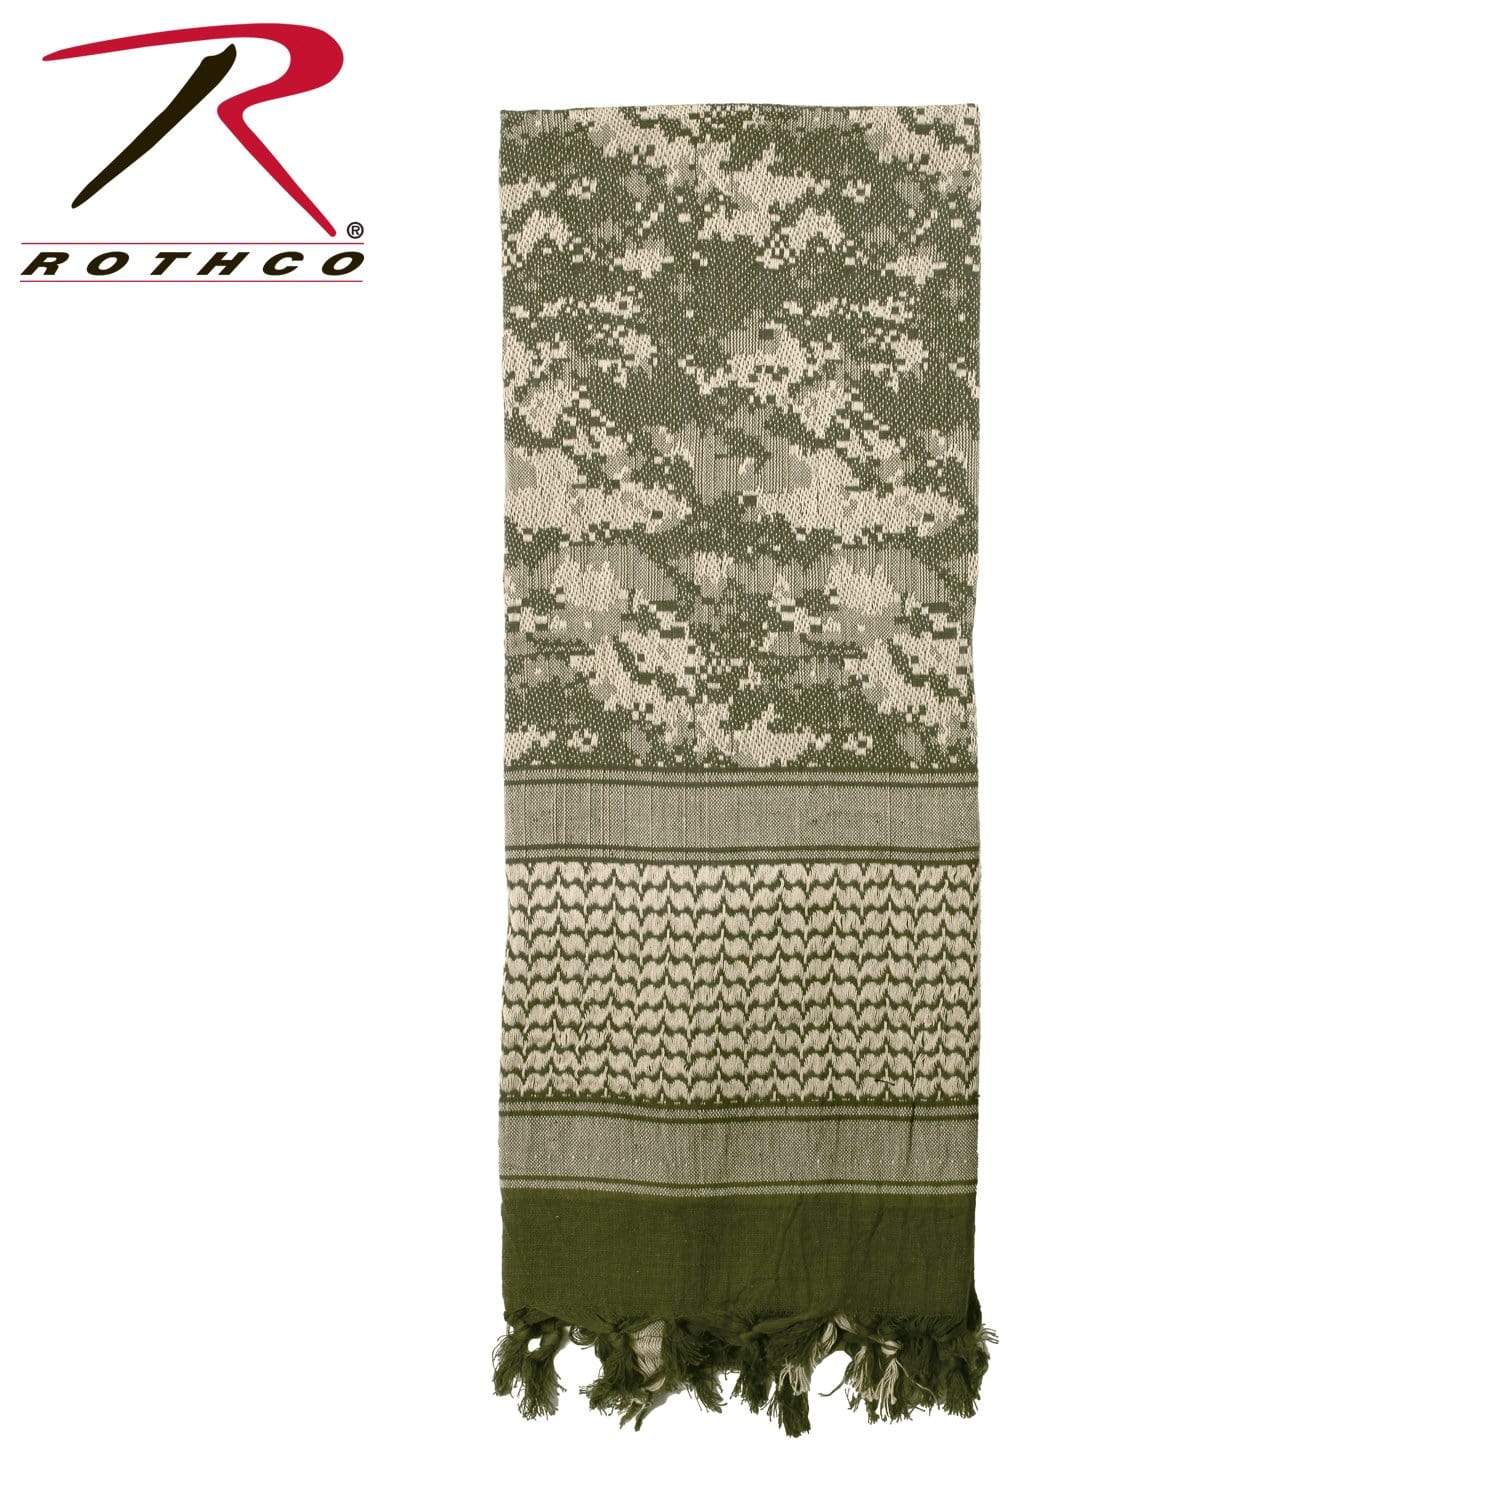 Rothco Digital Camo Shemagh Tactical Desert Keffiyeh Scarf - ACU - Eminent Paintball And Airsoft